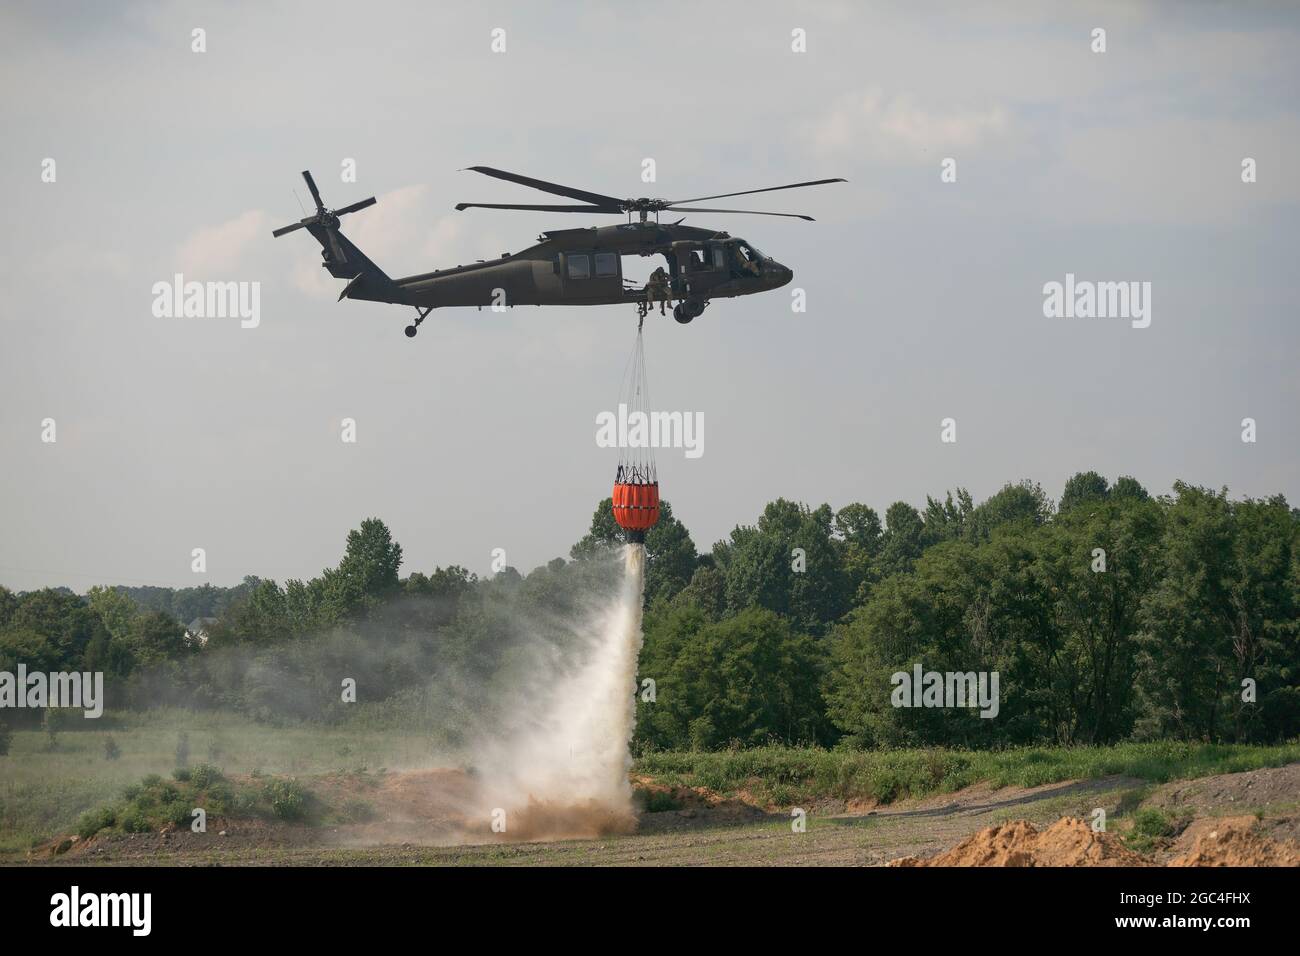 Soldiers of the Kentucky Army National Guard drop water while conducting water bucket training at Wendhell H. Ford Regional Training Center at Greenville, KY on July 19, 2021.  Crewmembers from Bravo Co., 2/147th Assault Helicopter Battalion trains using UH-60 Black Hawks to extinguish forest fires and wild fires to assist local fire departments across Kentucky and neighboring states.  This image was electronically cropped and ethically enhanced to emphasize the subject and does not misrepresent the subject or original image in any way (U.S. Army photo by Staff Sgt. Andrew Dickson). Stock Photo